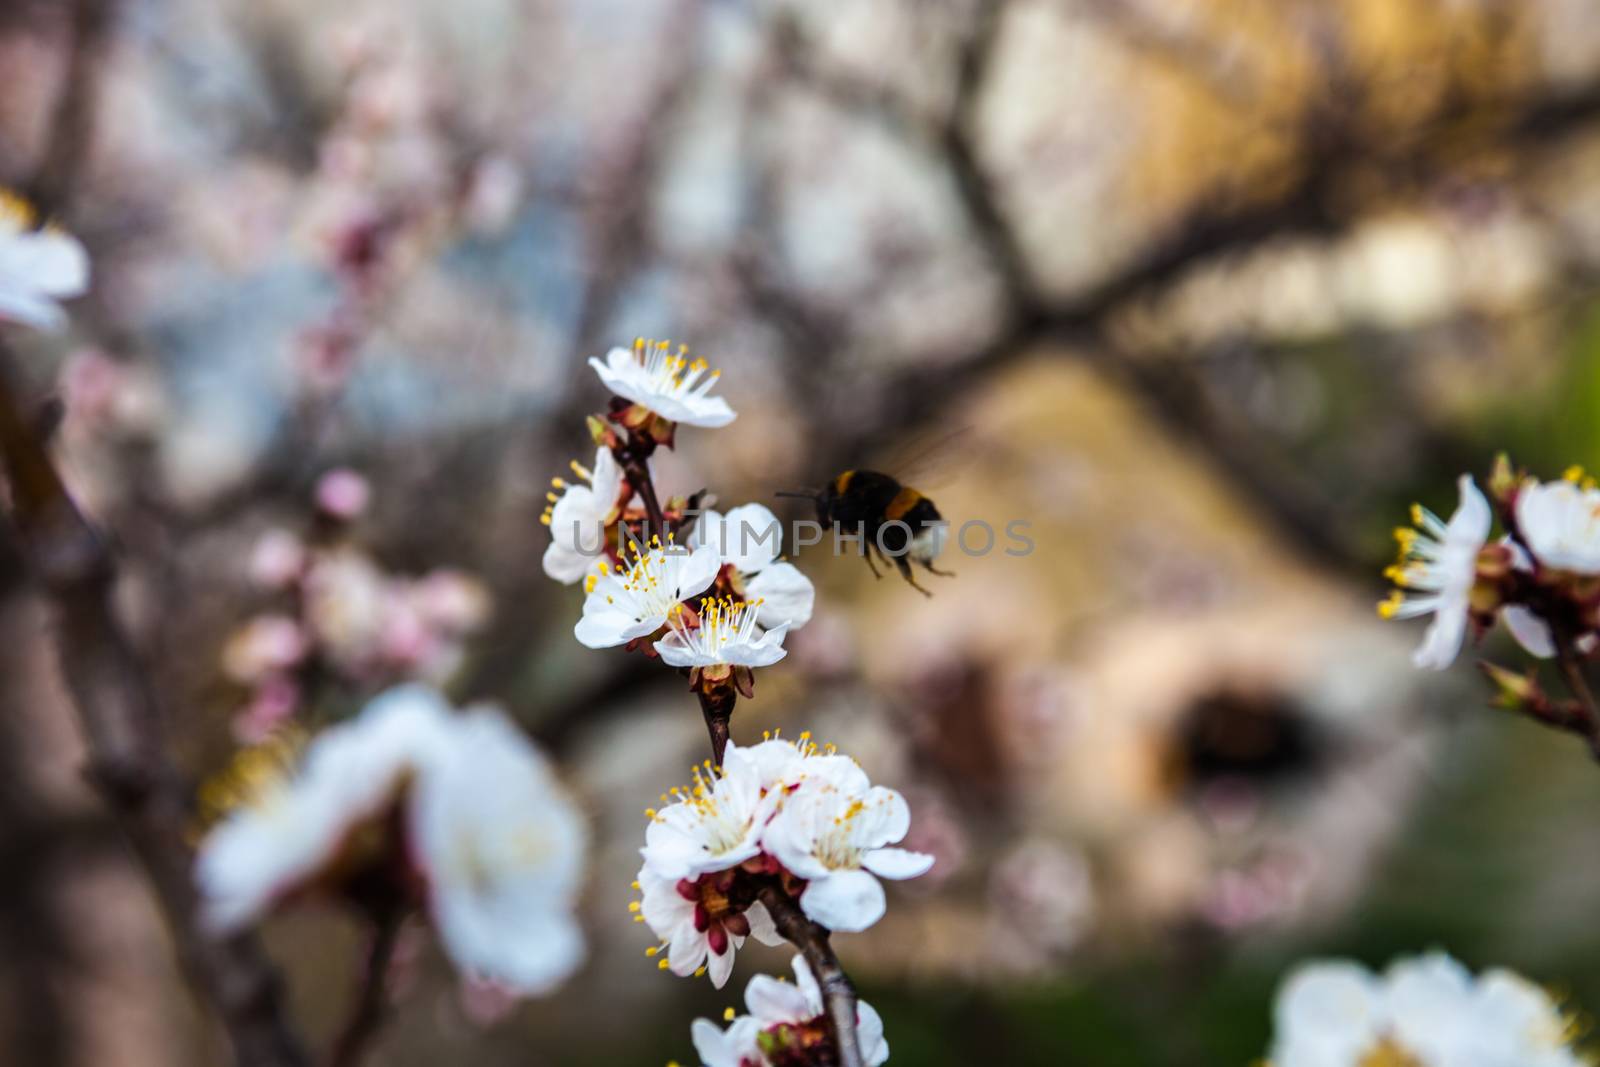 White flowers on the cherry tree branches and bumblebee.